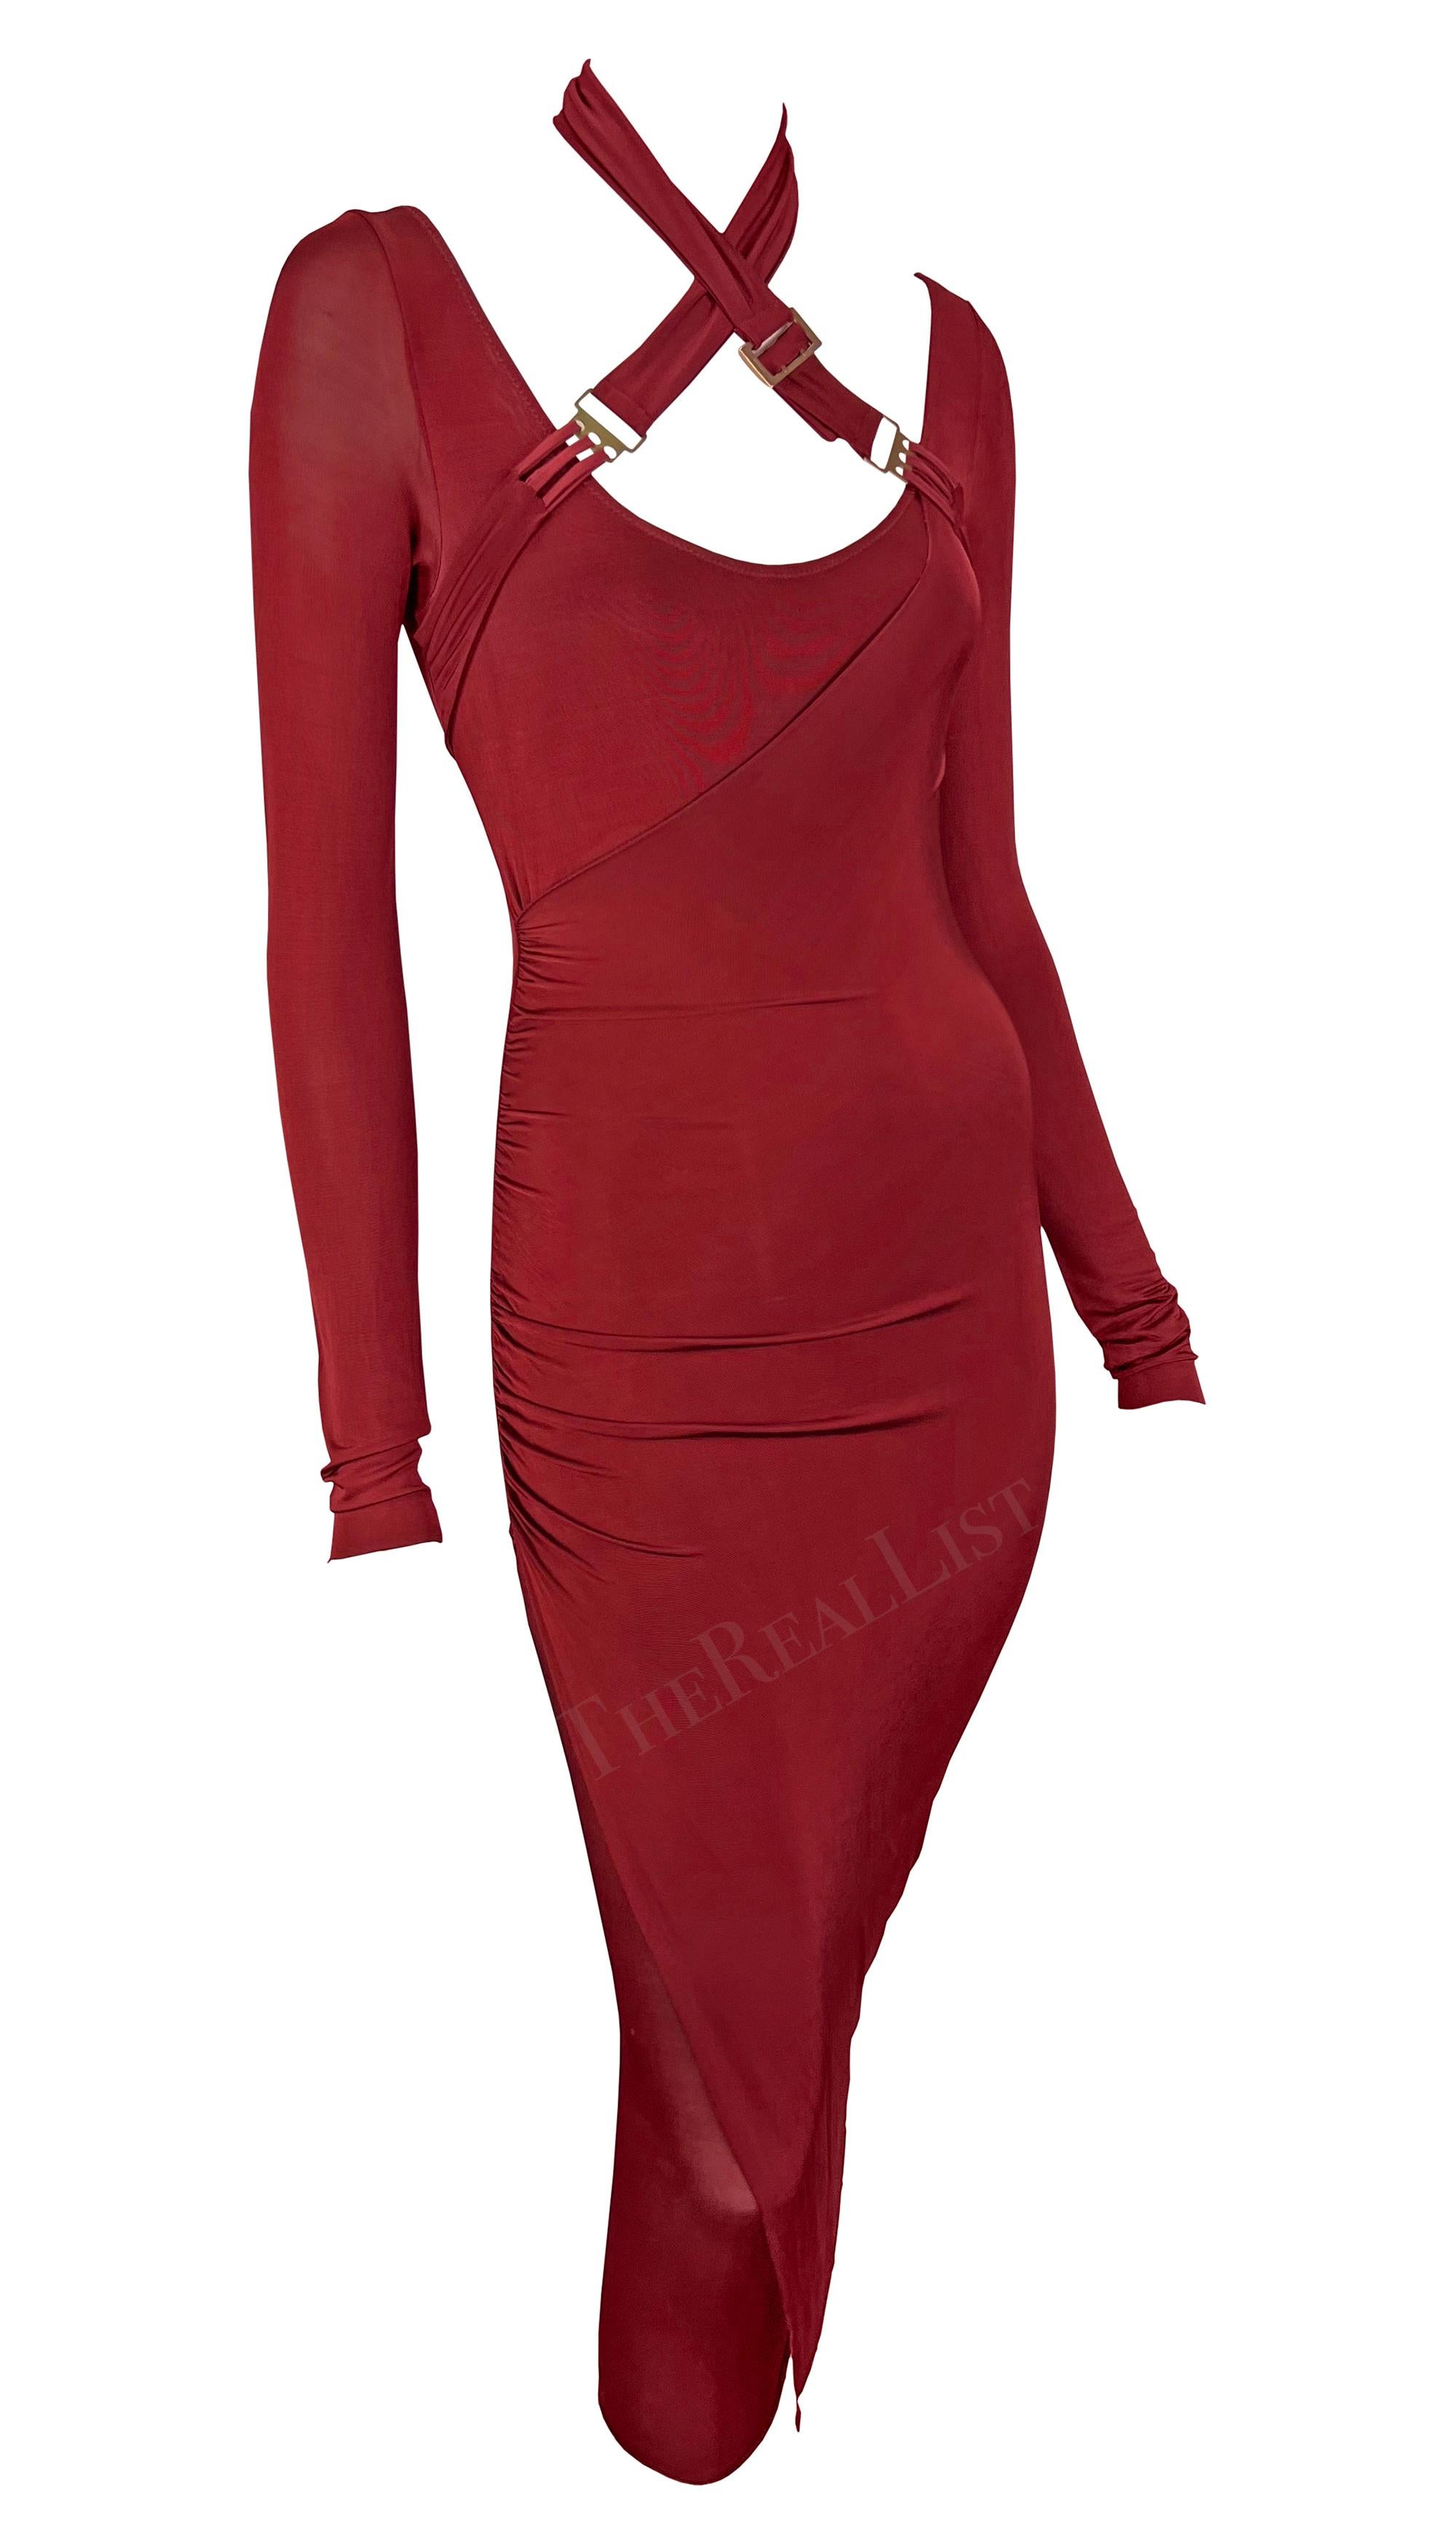 F/W 2003 Gucci by Tom Ford Red Bondage Strap Convertible Stretch Bodycon Dress For Sale 3